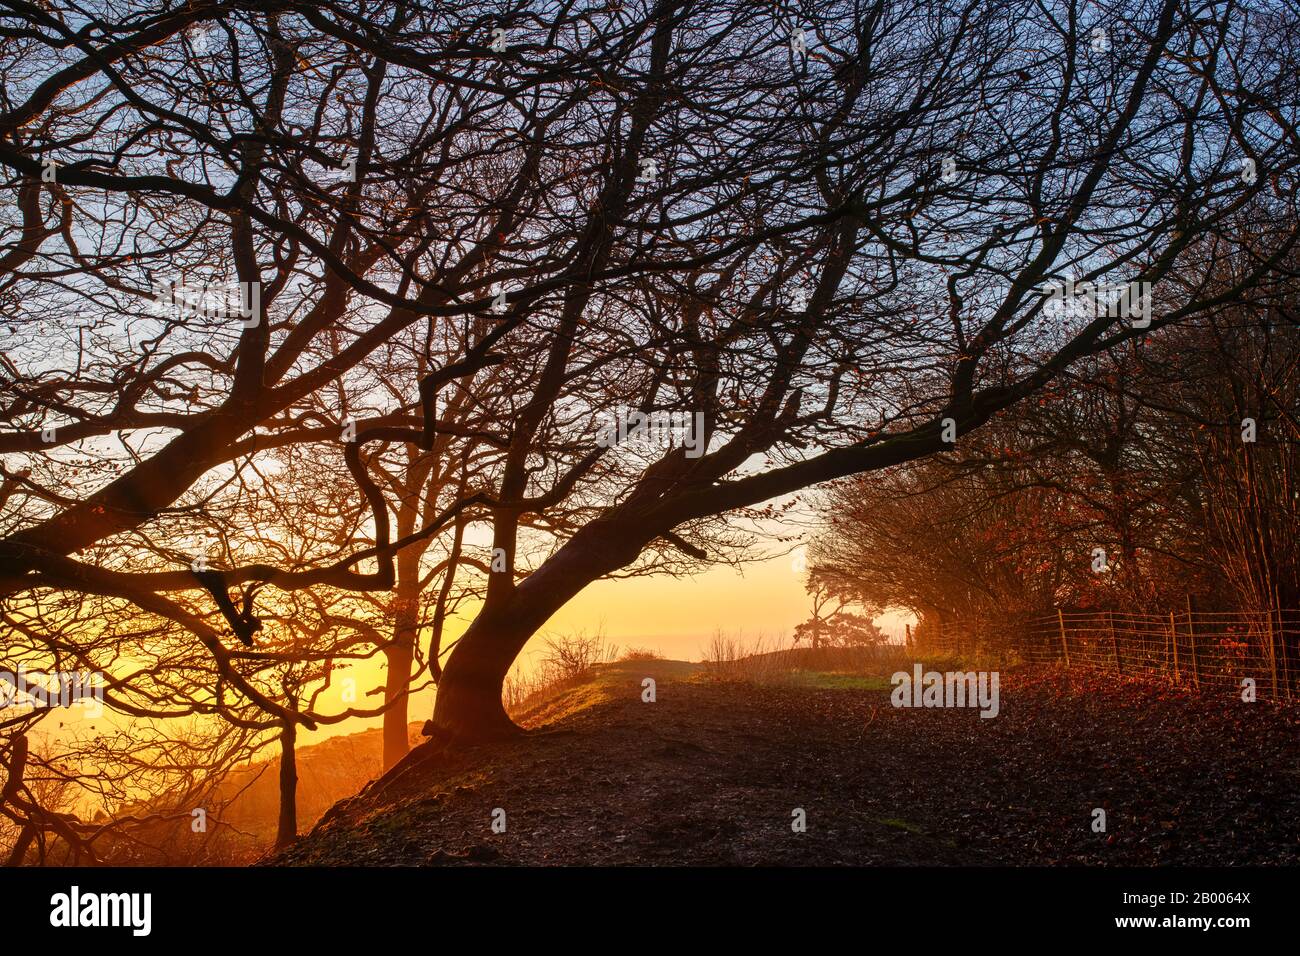 Old windswept beech trees on the top of Martinsell Hill on a foggy winter morning at sunrise. Near Oare, Vale of Pewsey, Wiltshire, England Stock Photo